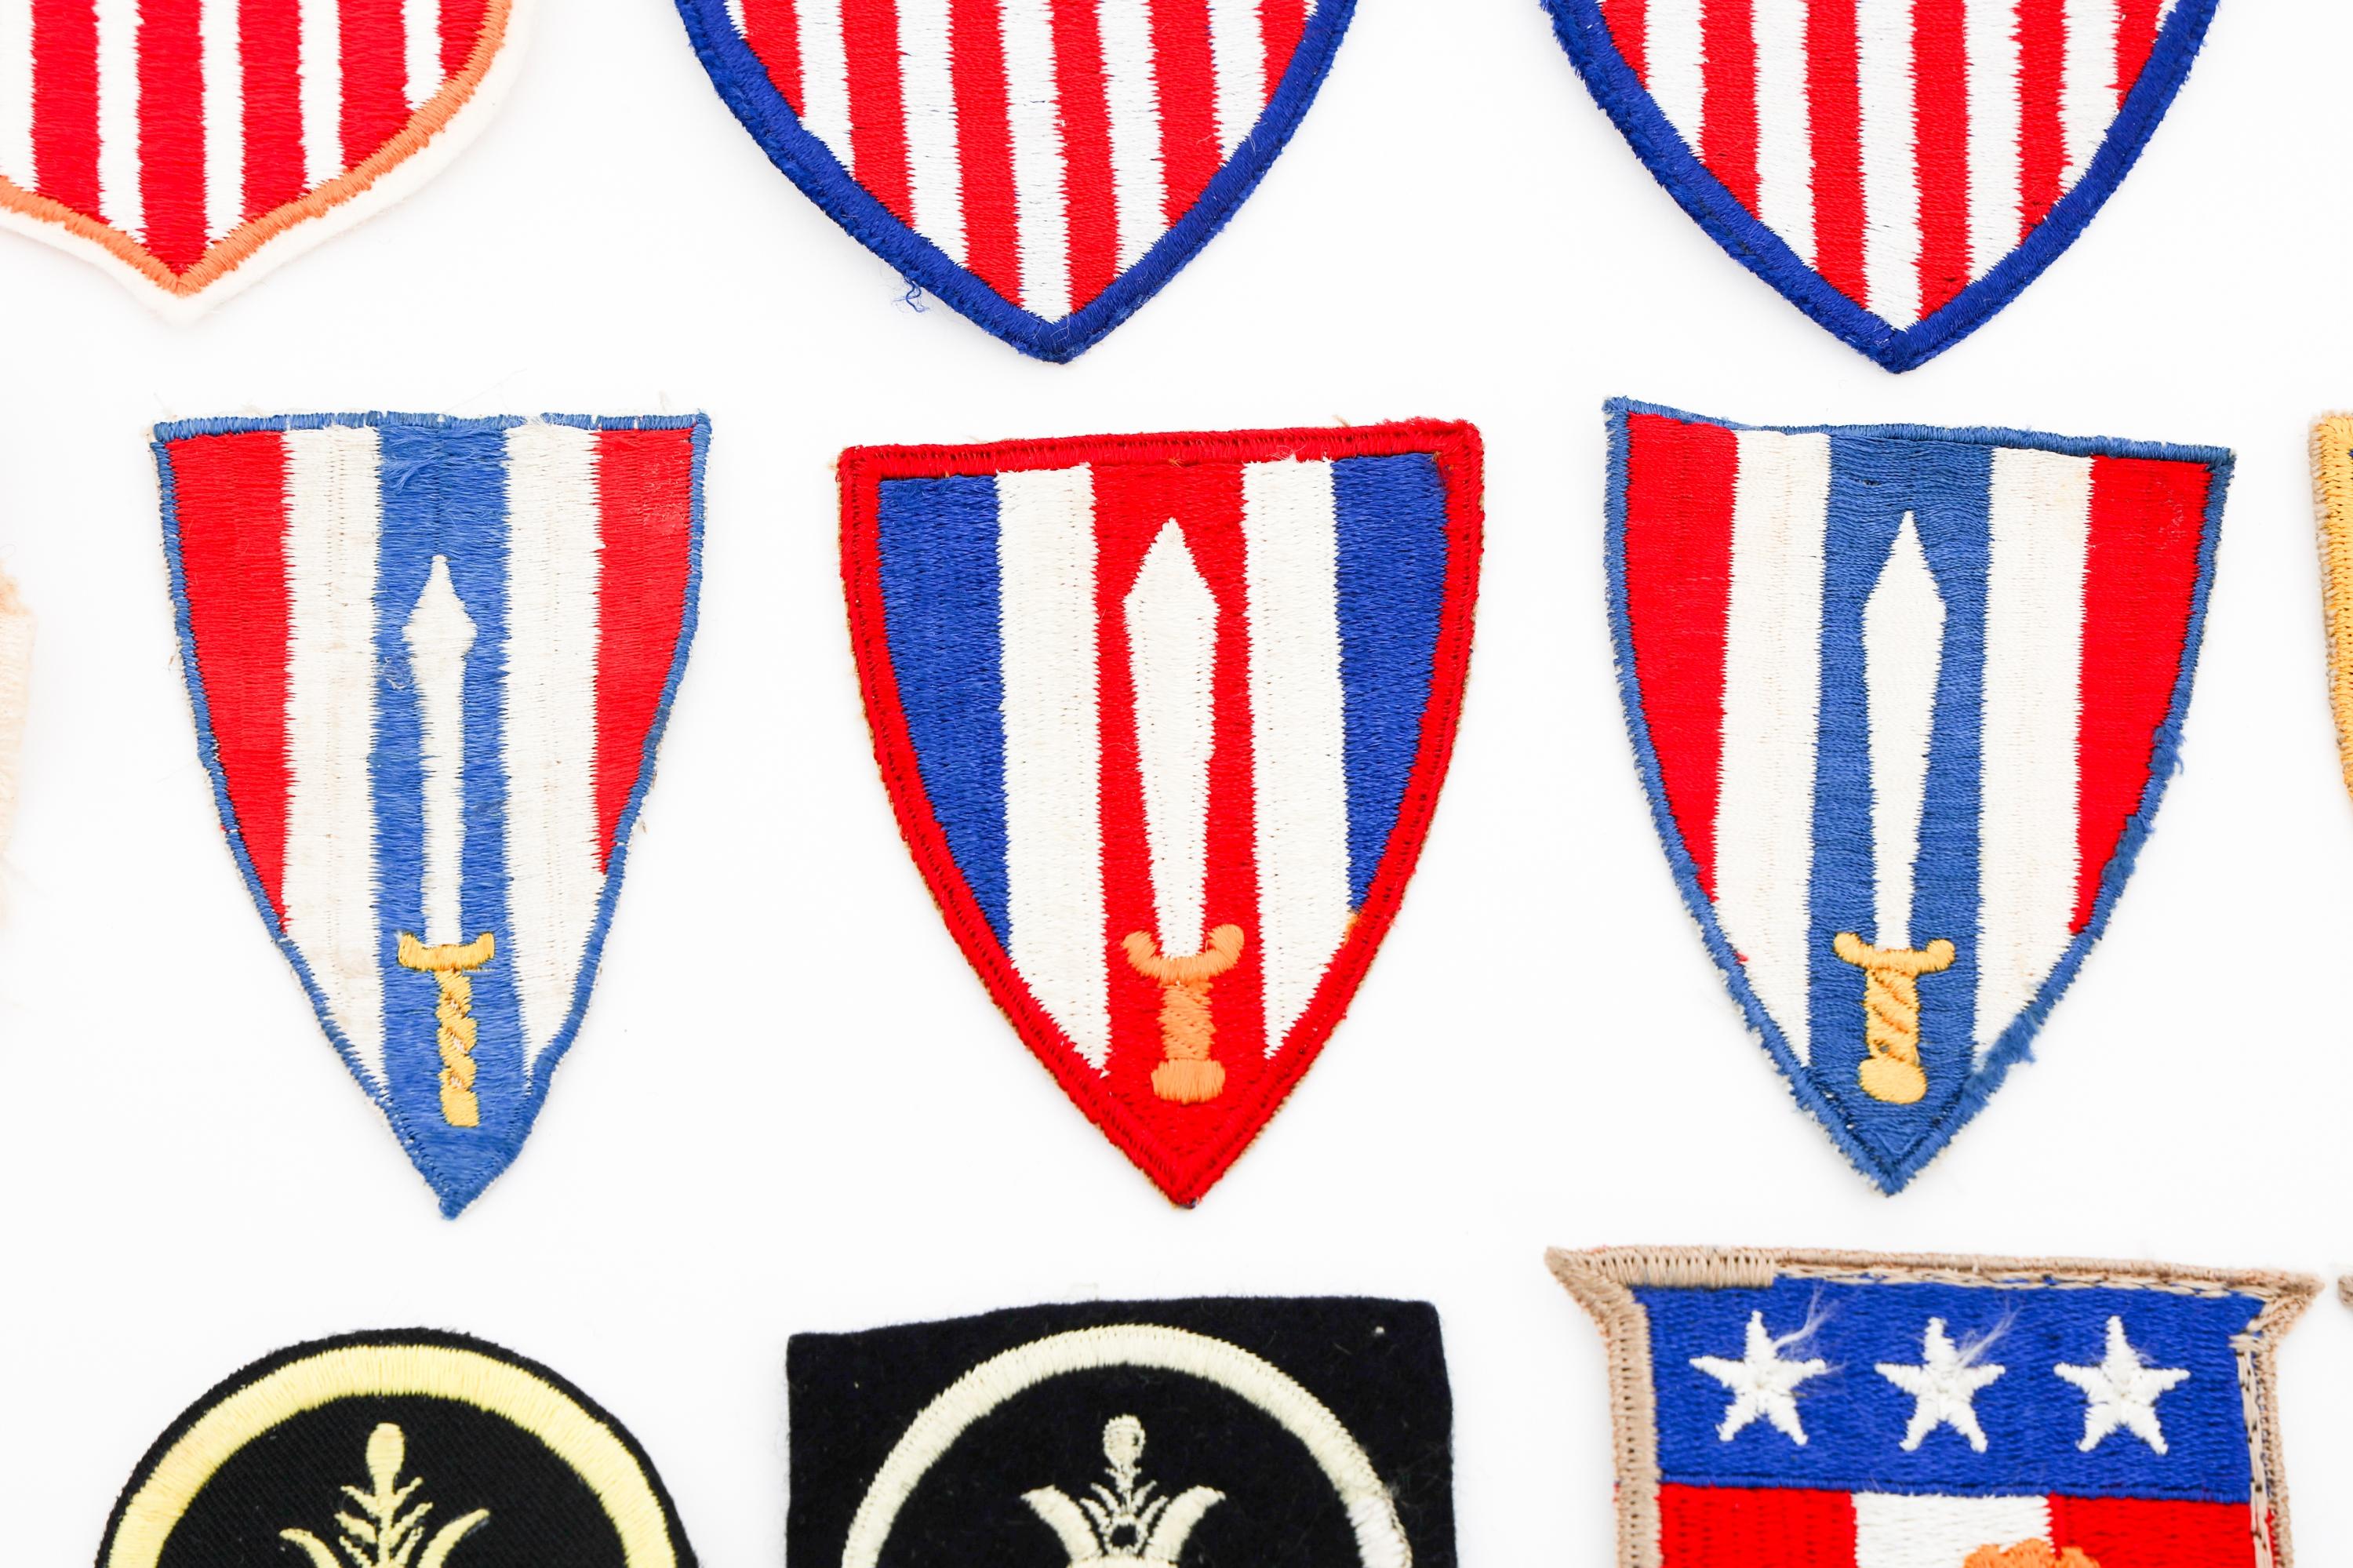 COLD WAR US ARMY COMMAND & MAAG PATCHES